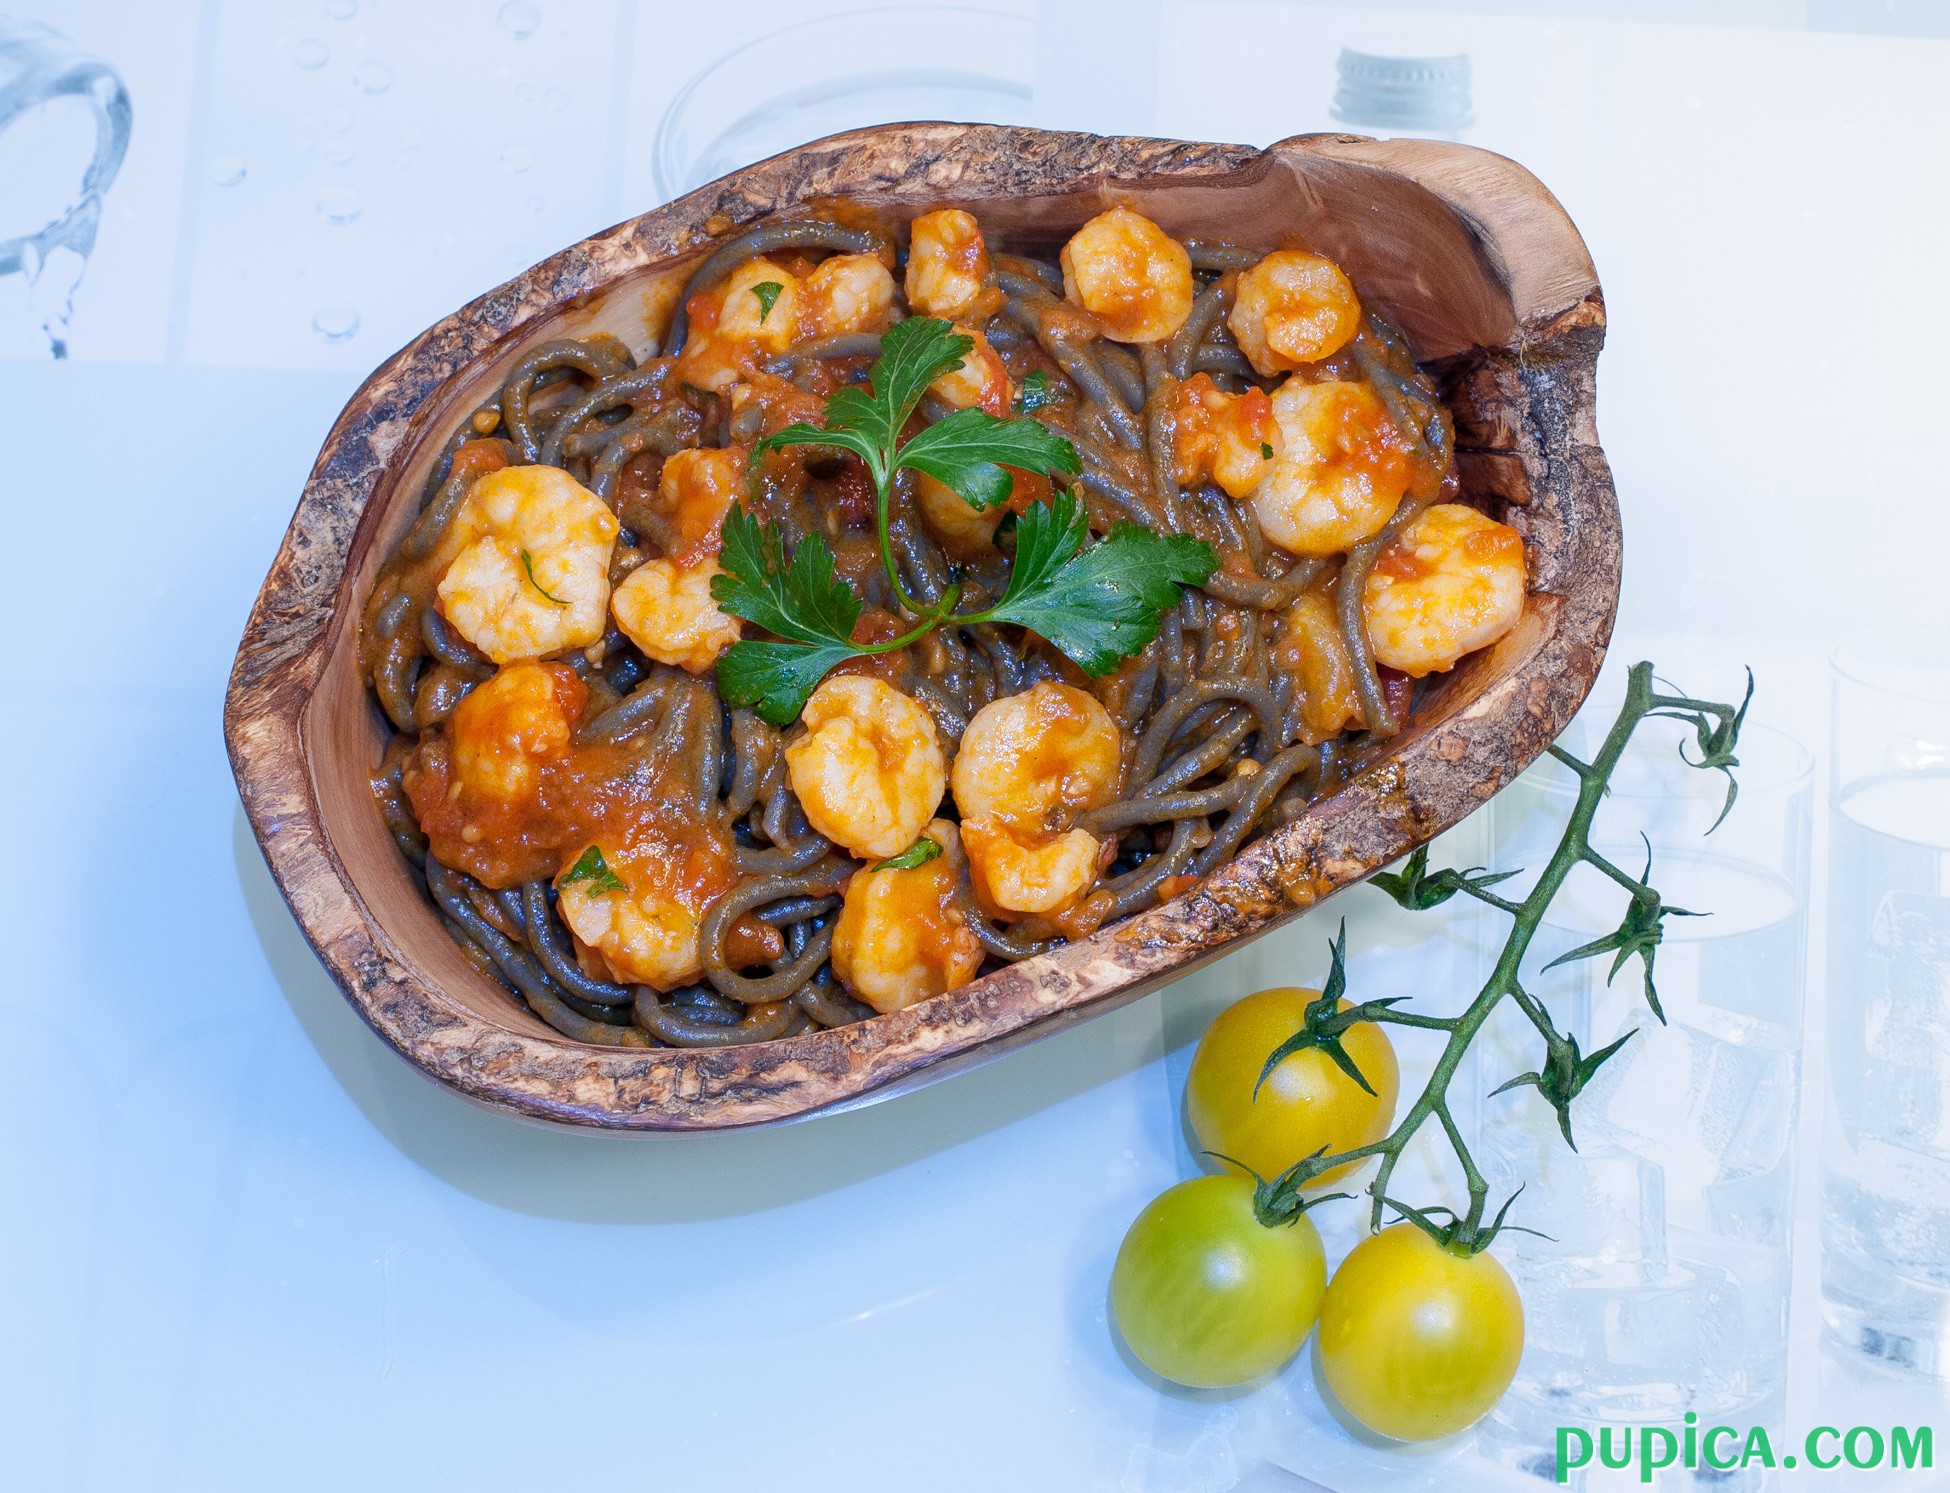 Pasta with Shrimps and Tomato sauce